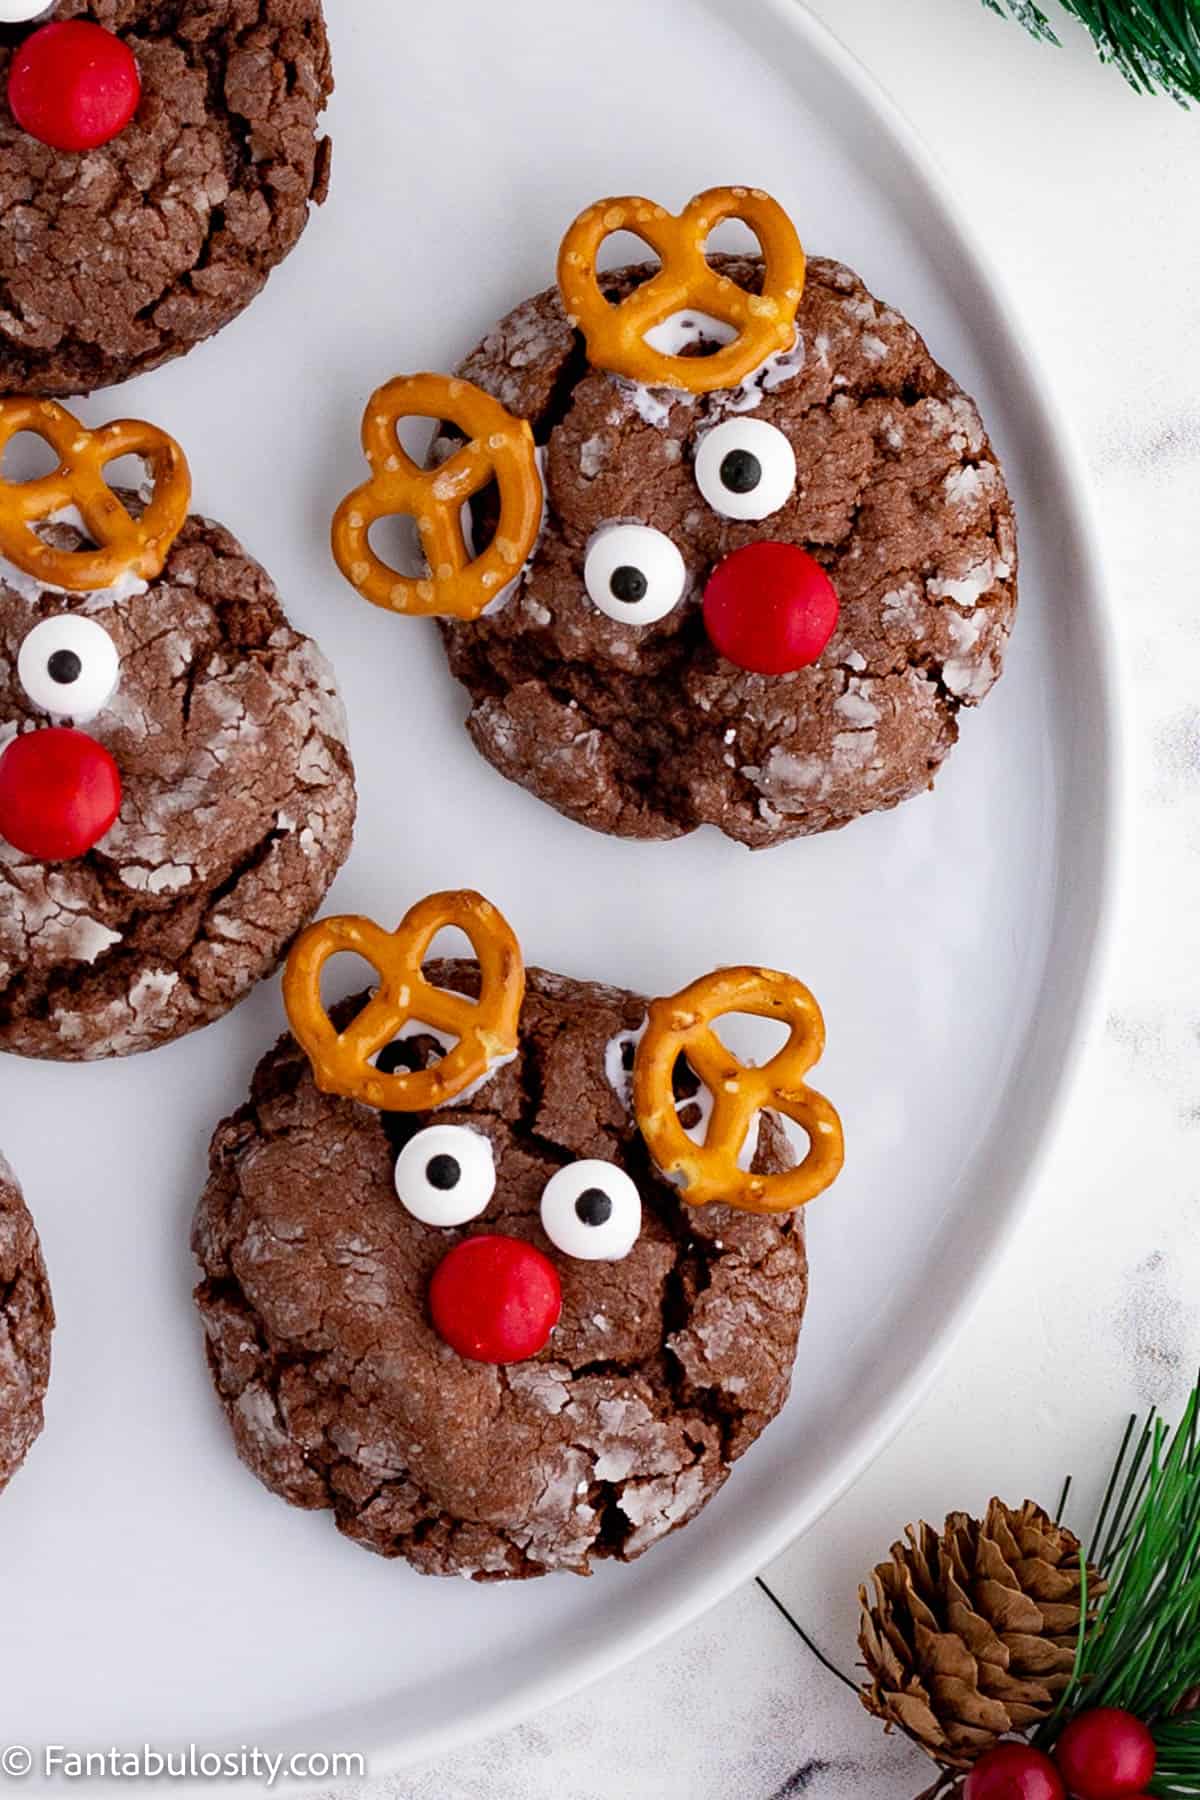 A close up photo of a white plate holding several round chocolate cookies that have been decorated to look like reindeer faces